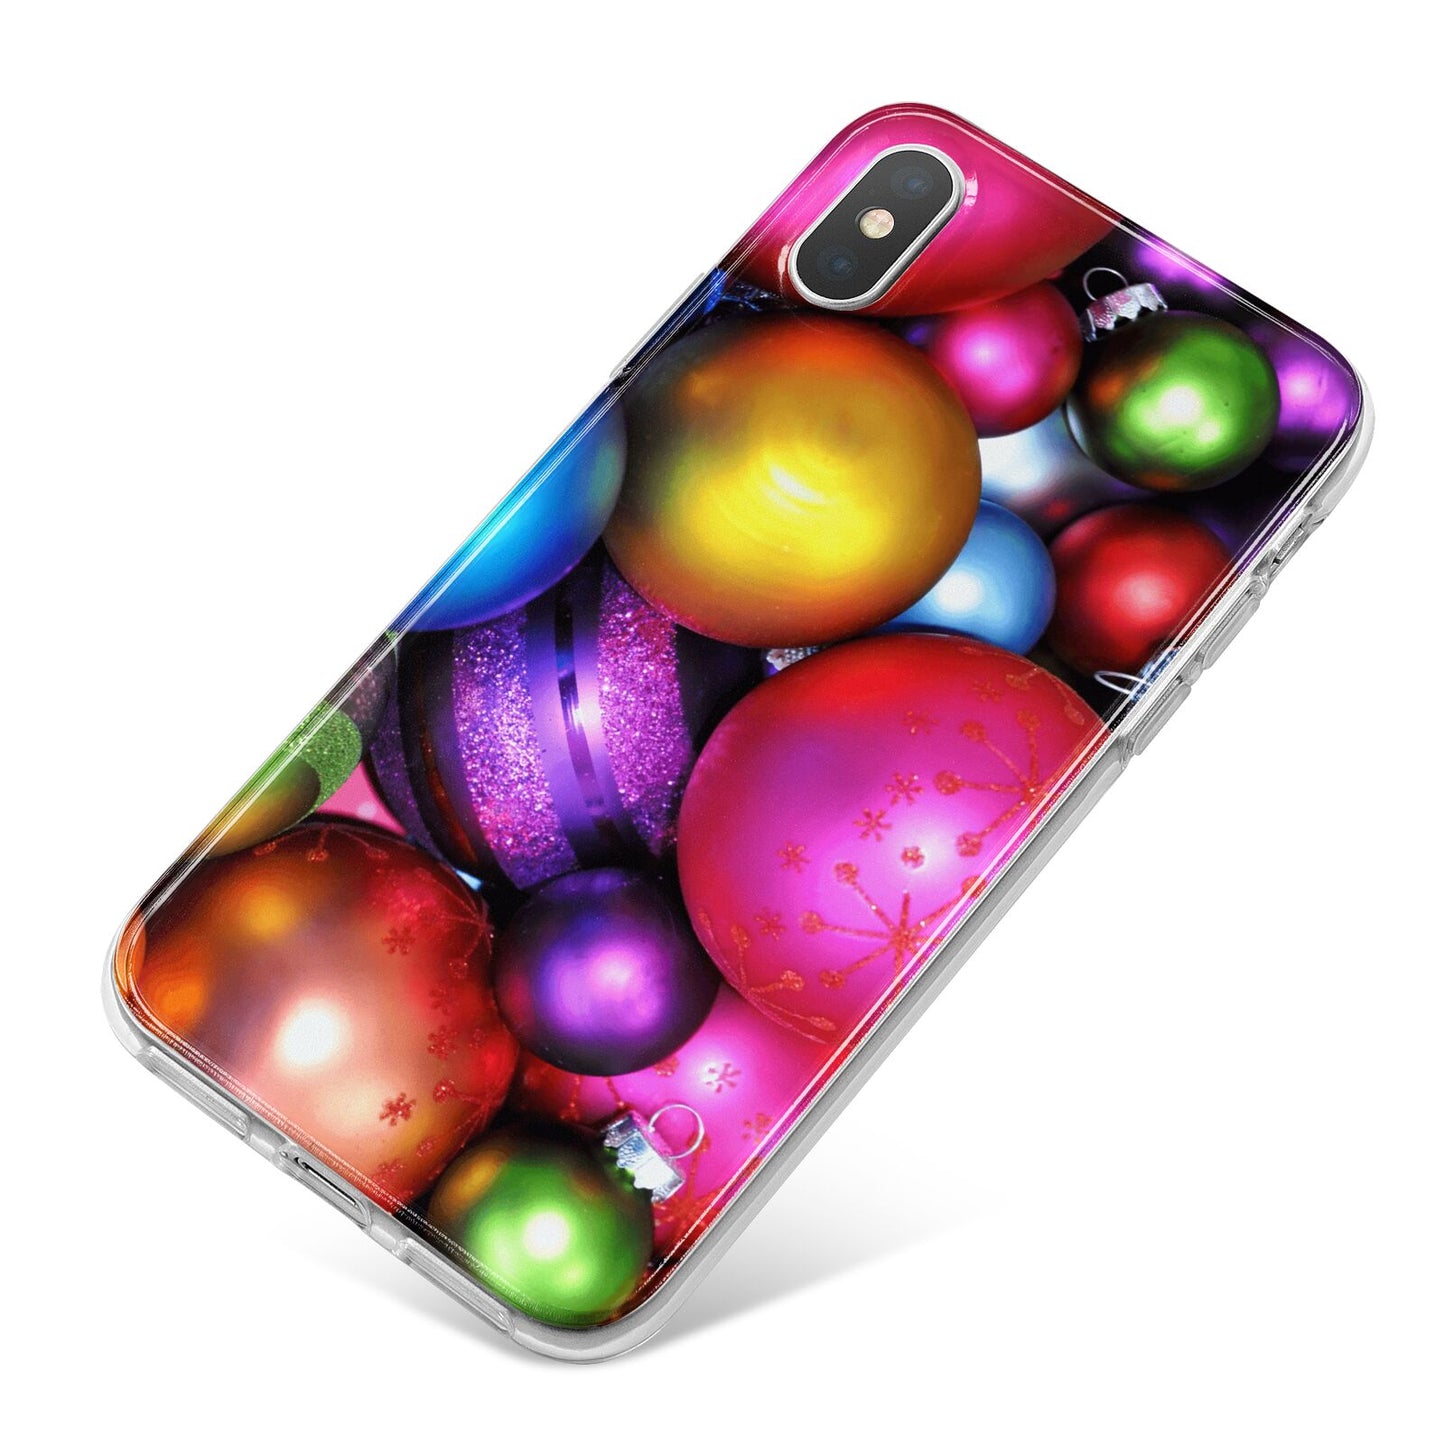 Bauble iPhone X Bumper Case on Silver iPhone